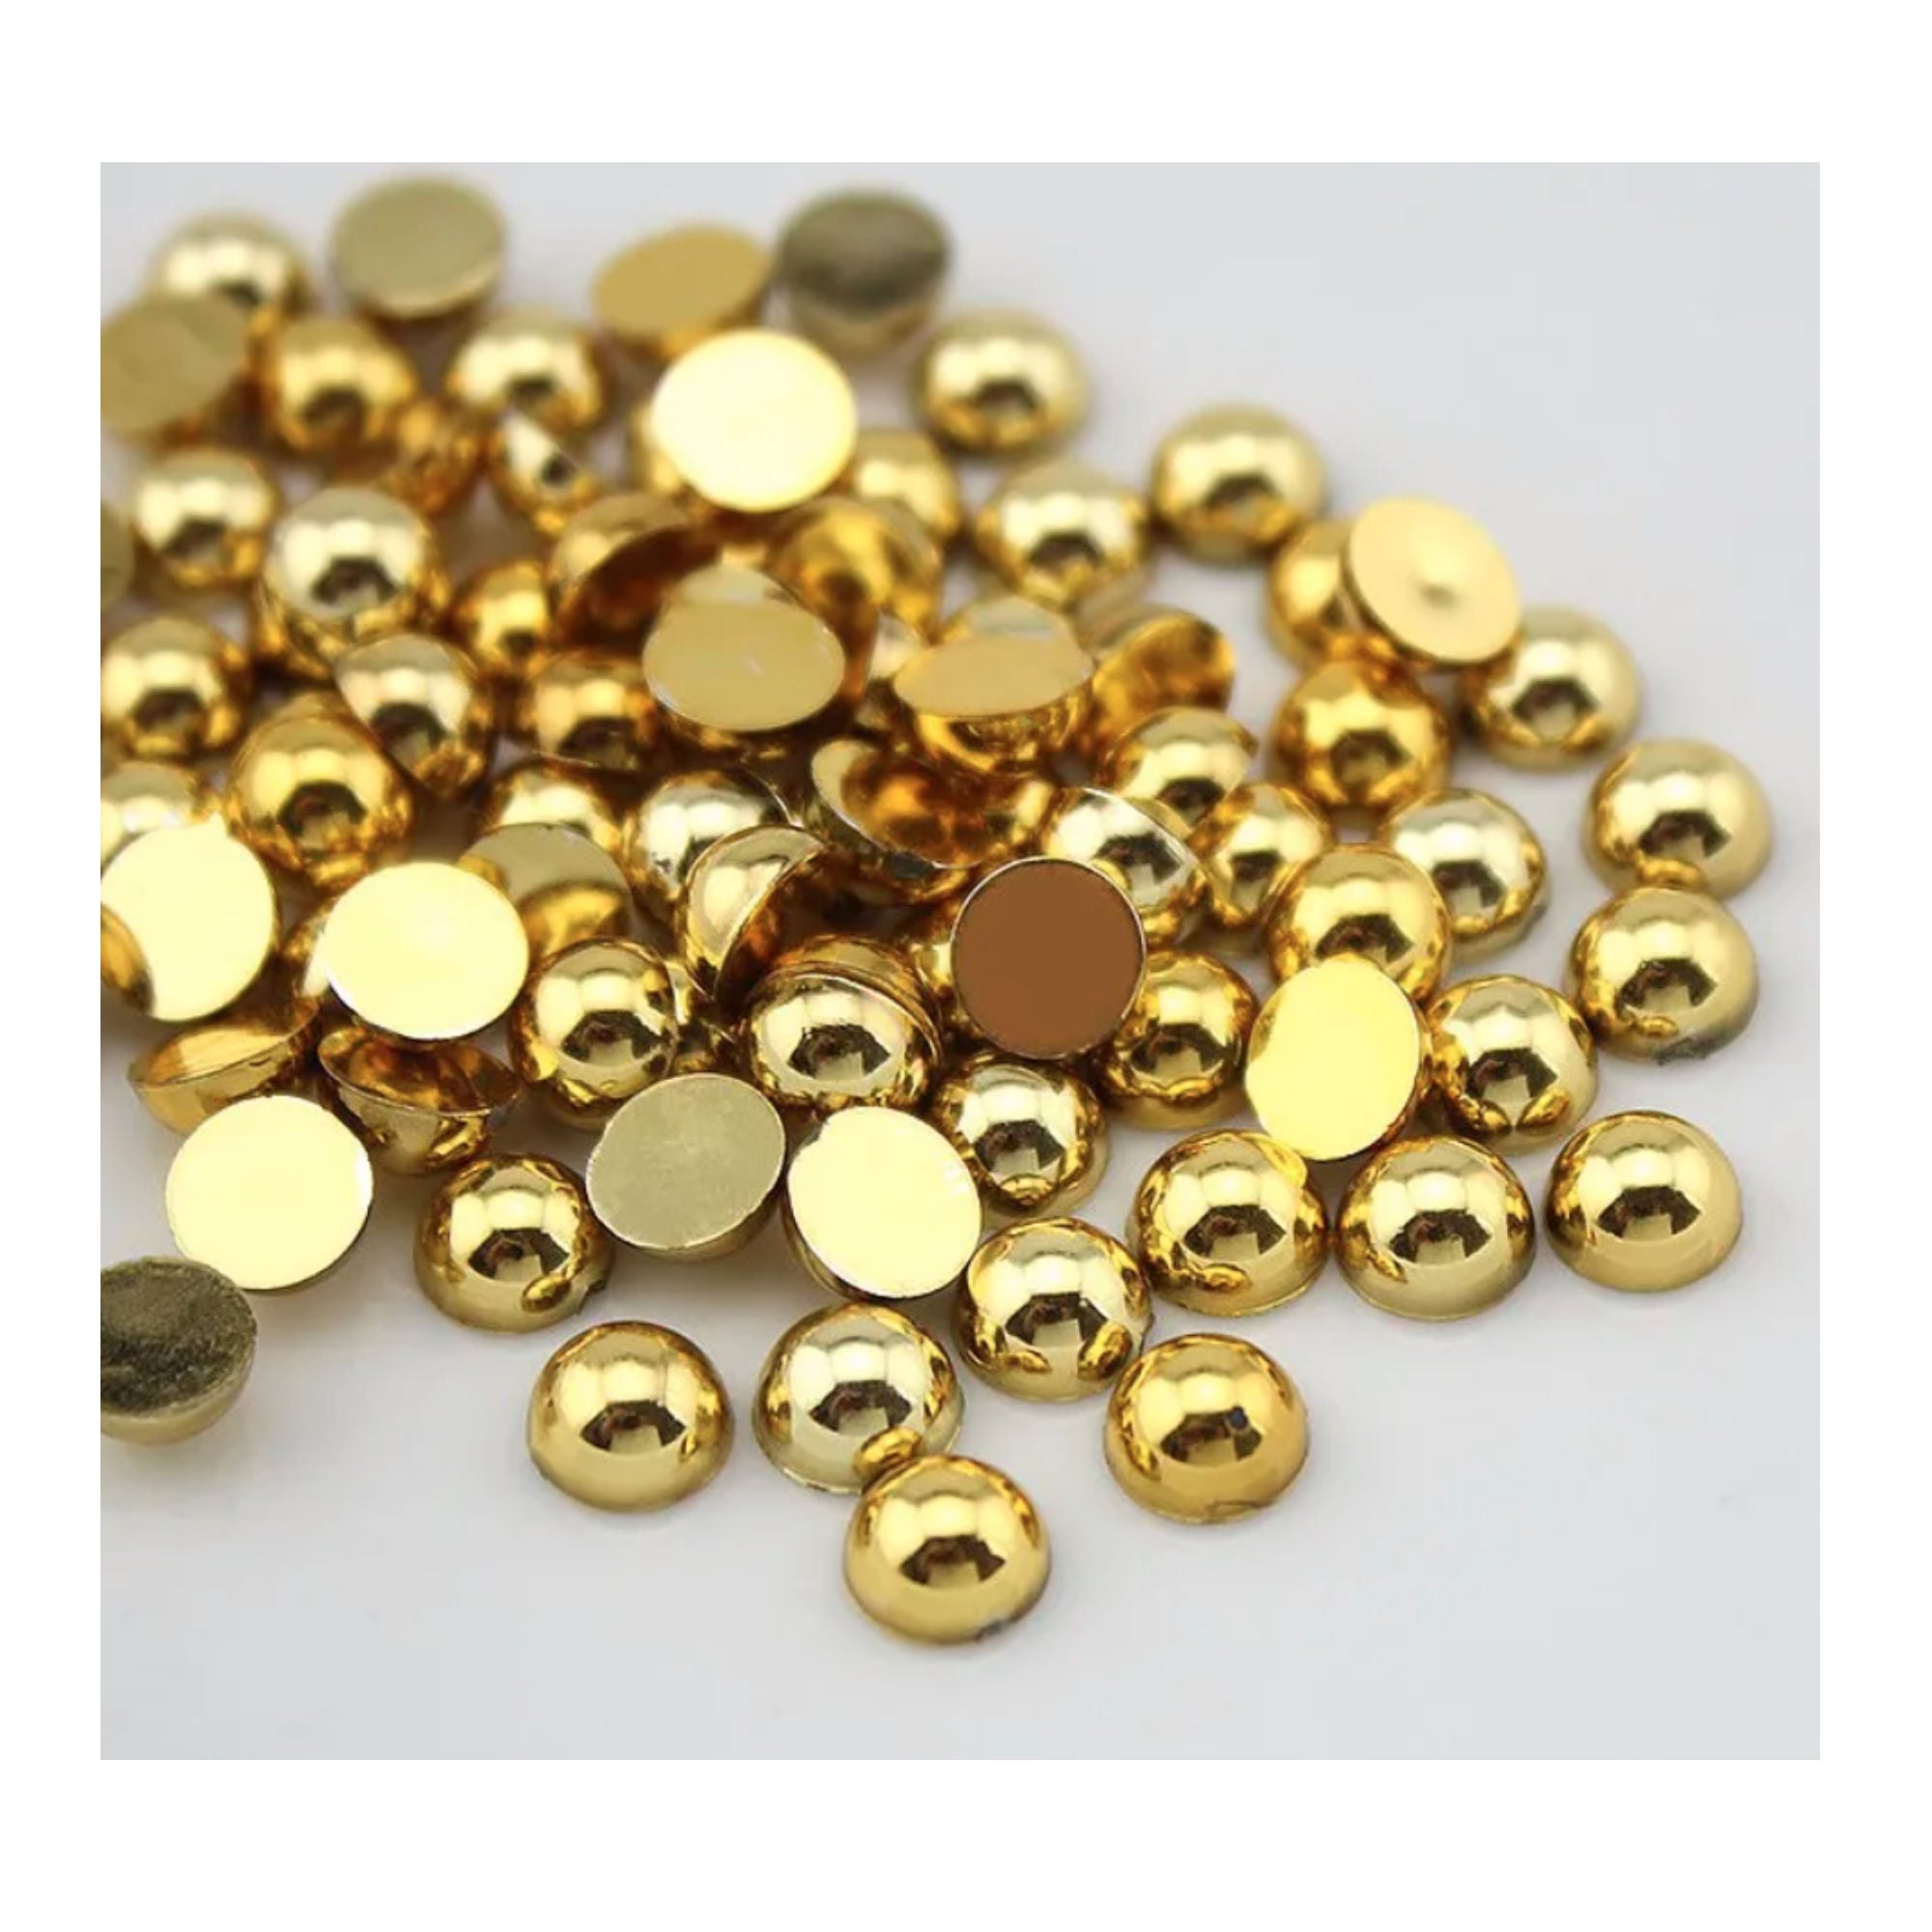 Gold Chrome 6mm Flatback Pearls by SSC Designs - 100/Package